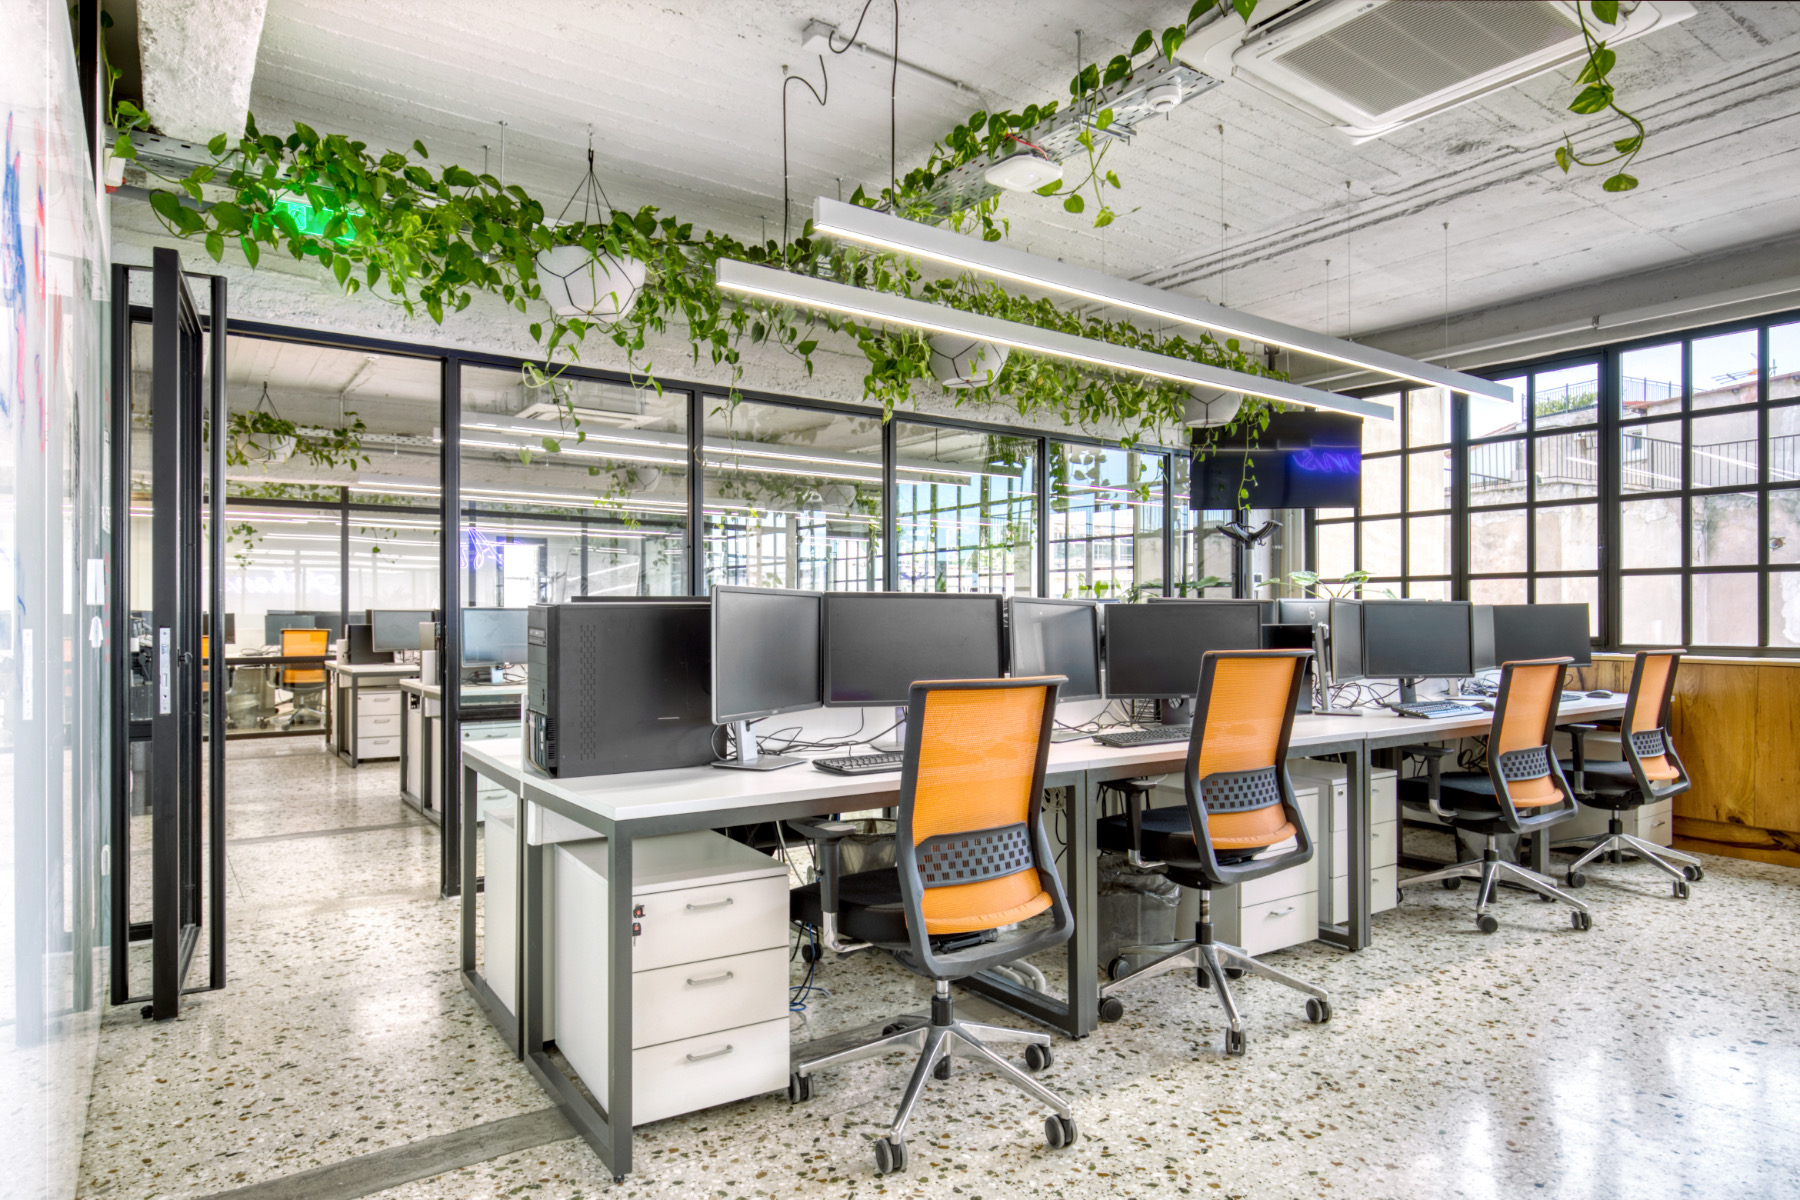 A Look Inside Ferryscanner’s New Athens Office